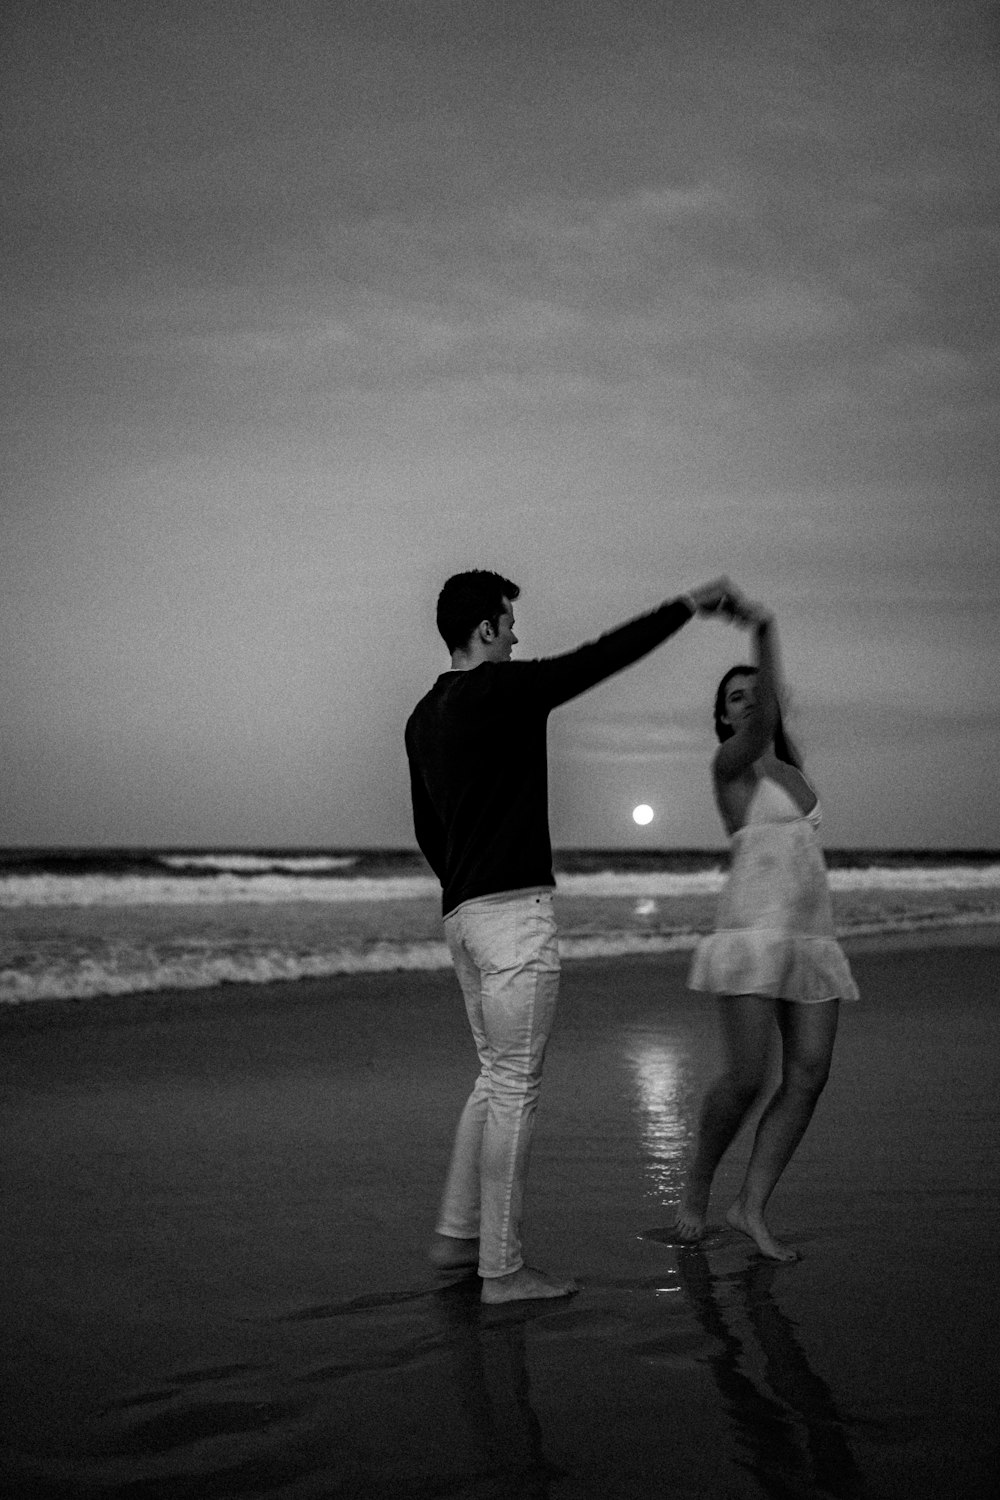 a man and a woman dancing on the beach